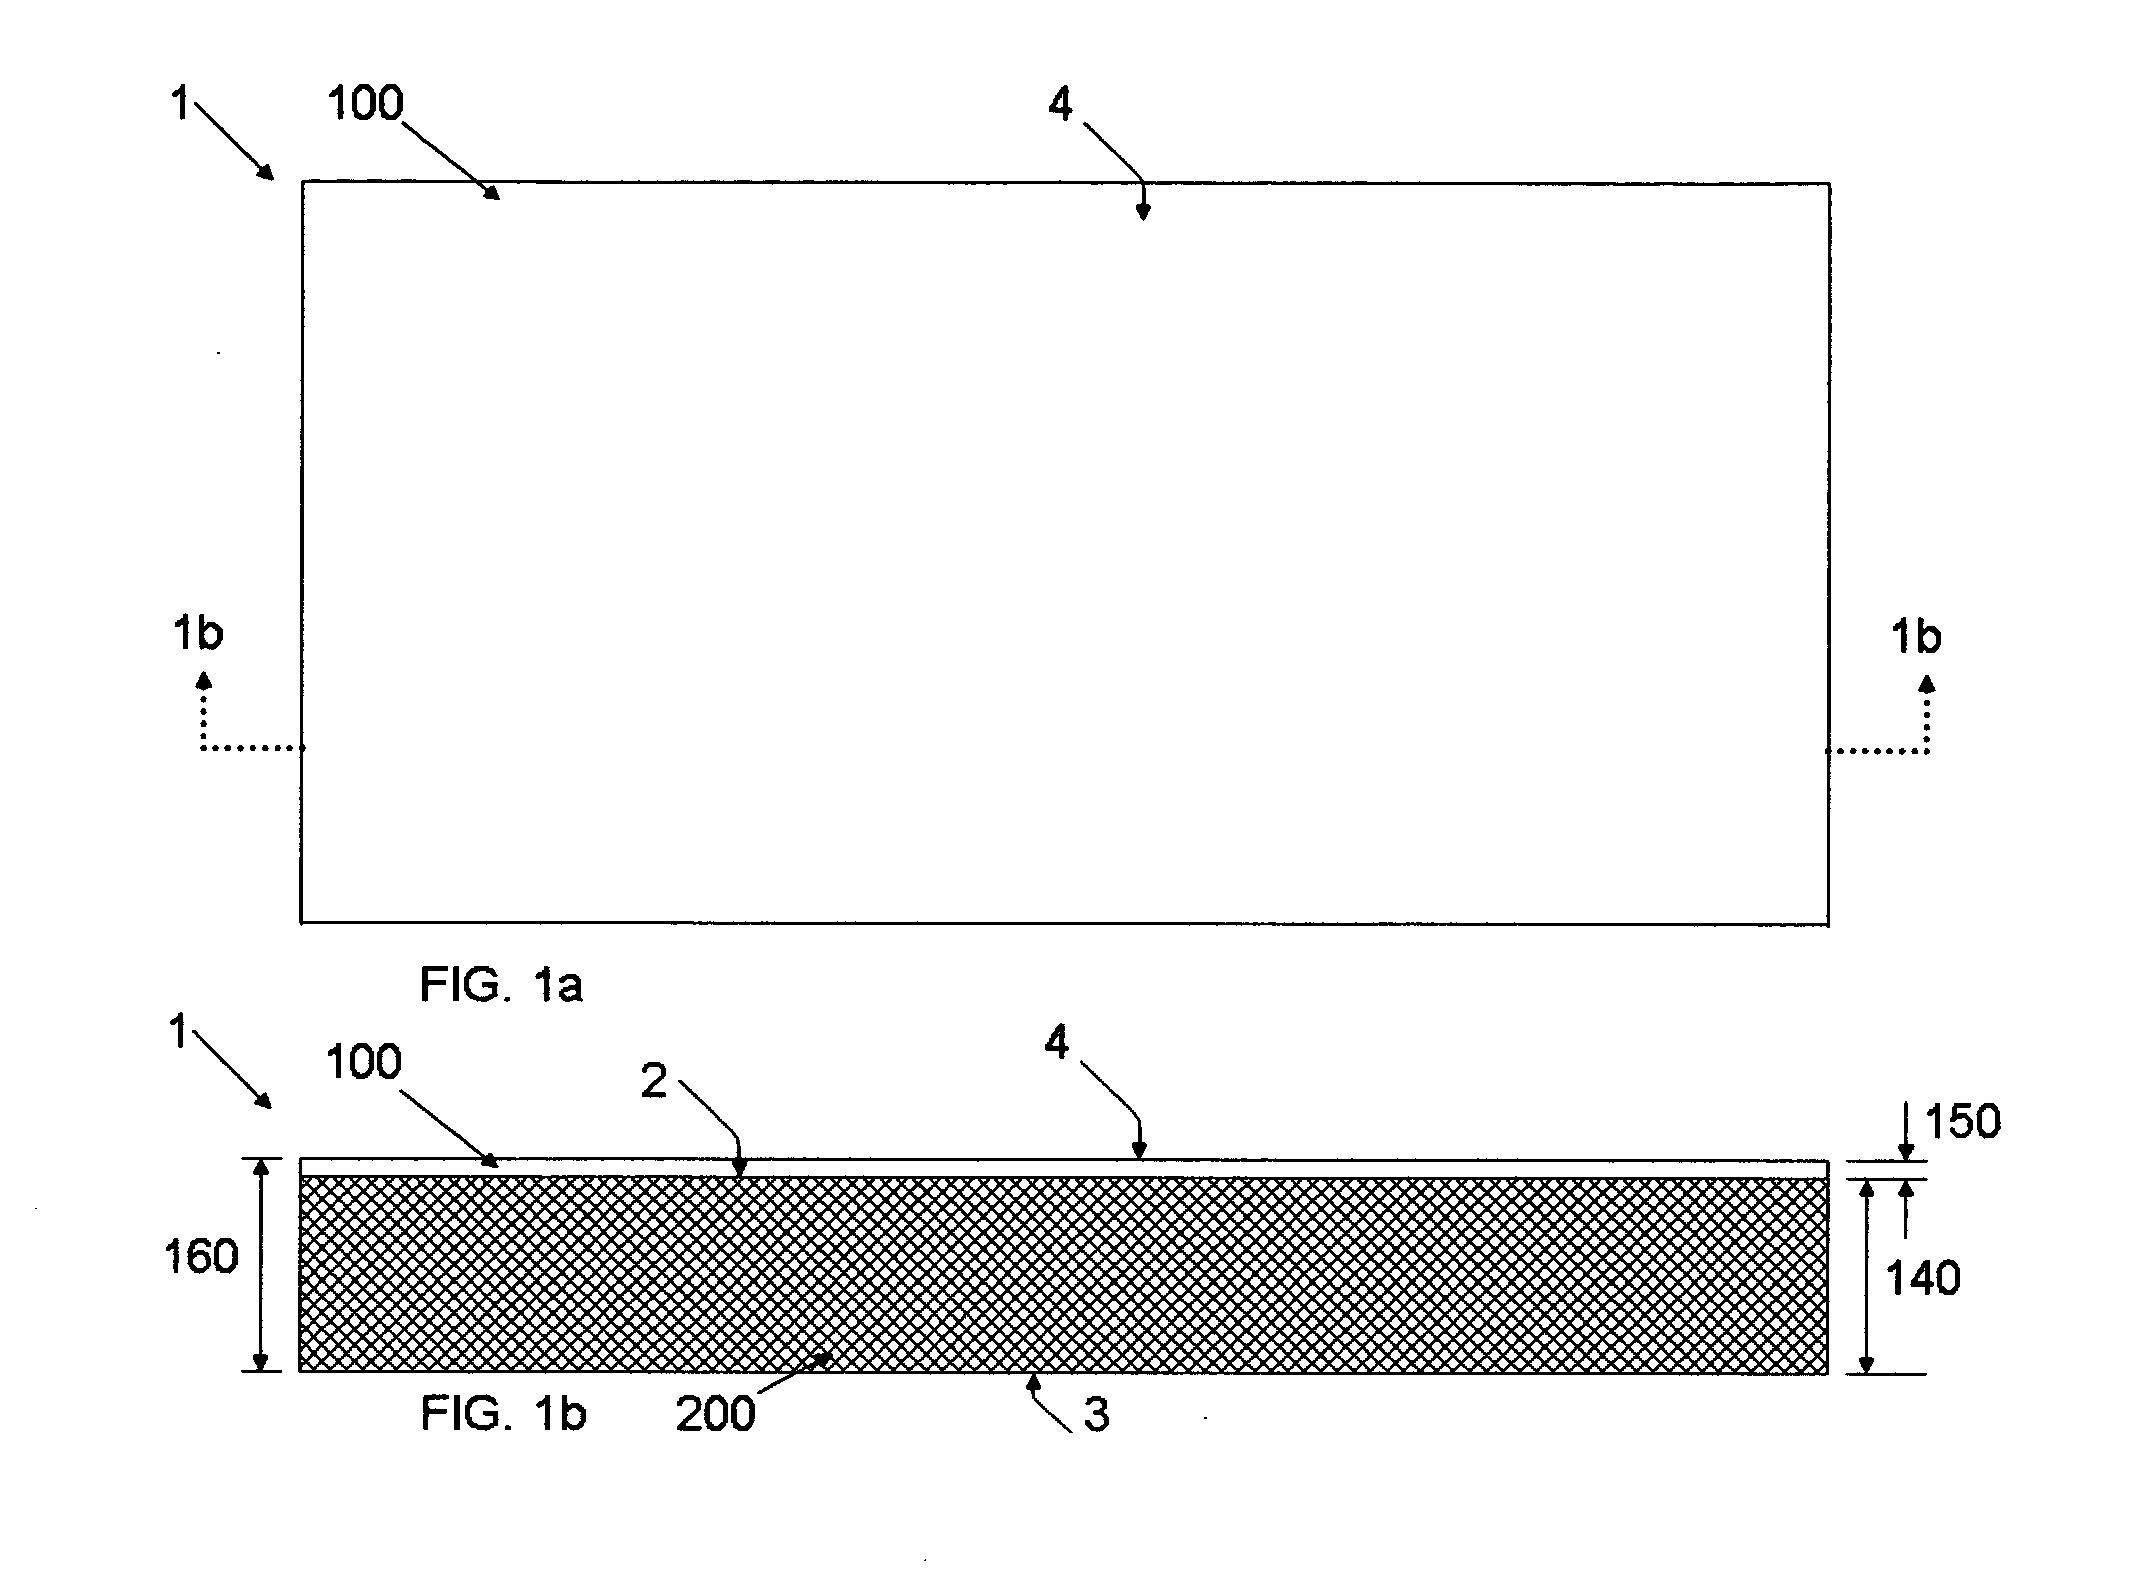 Reusable template for creation of thin films; method of making and using template; and thin films produced from template